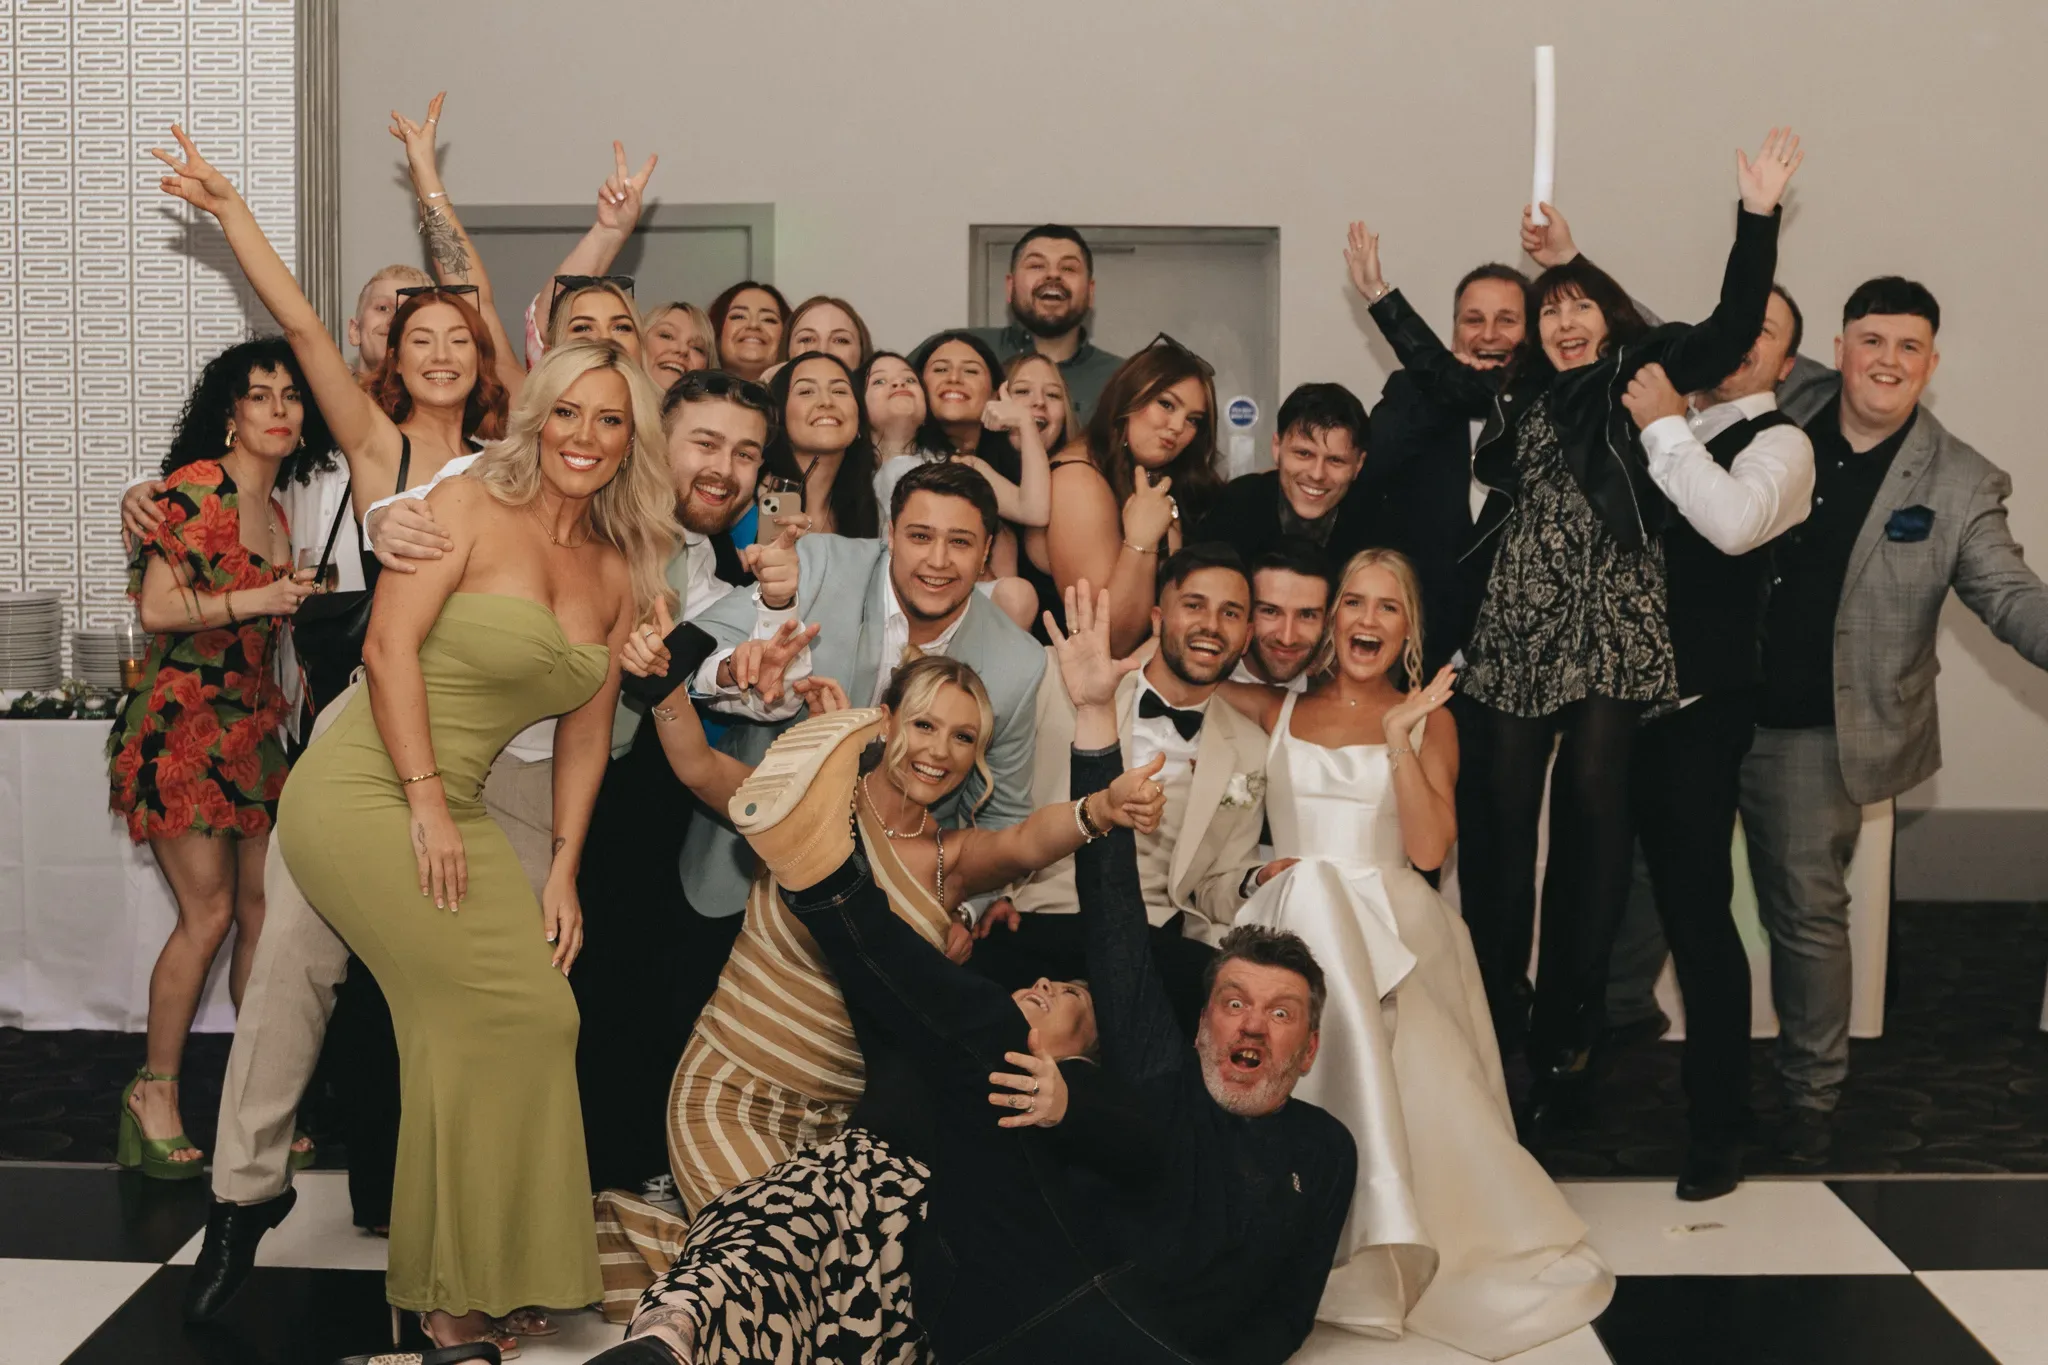 A lively group of around twenty people, including a bride in white and a groom in a suit, celebrates joyfully at a wedding reception. they're posing playfully, some raising their arms or making faces, with a neutral-toned wall in the background.